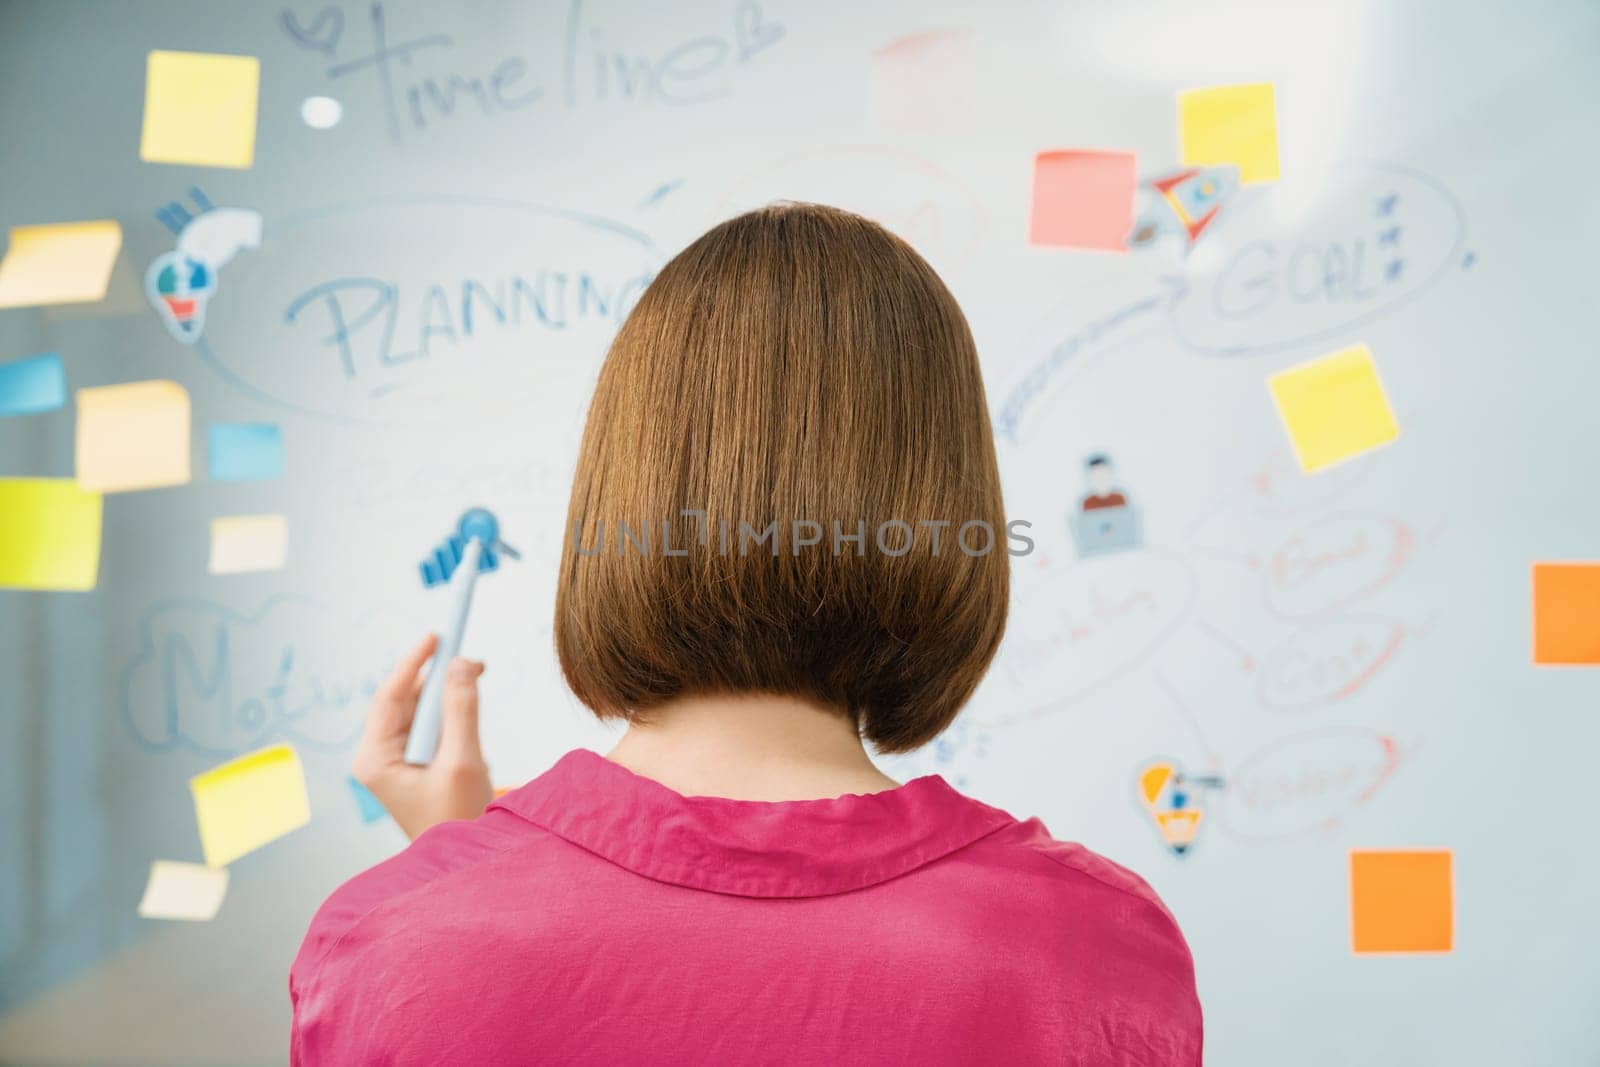 Beautiful businesswoman putting sticker on glass board while thinking about creative marketing strategy by using mind map and sticky note. Creative business meeting concept. Back view. Immaculate.